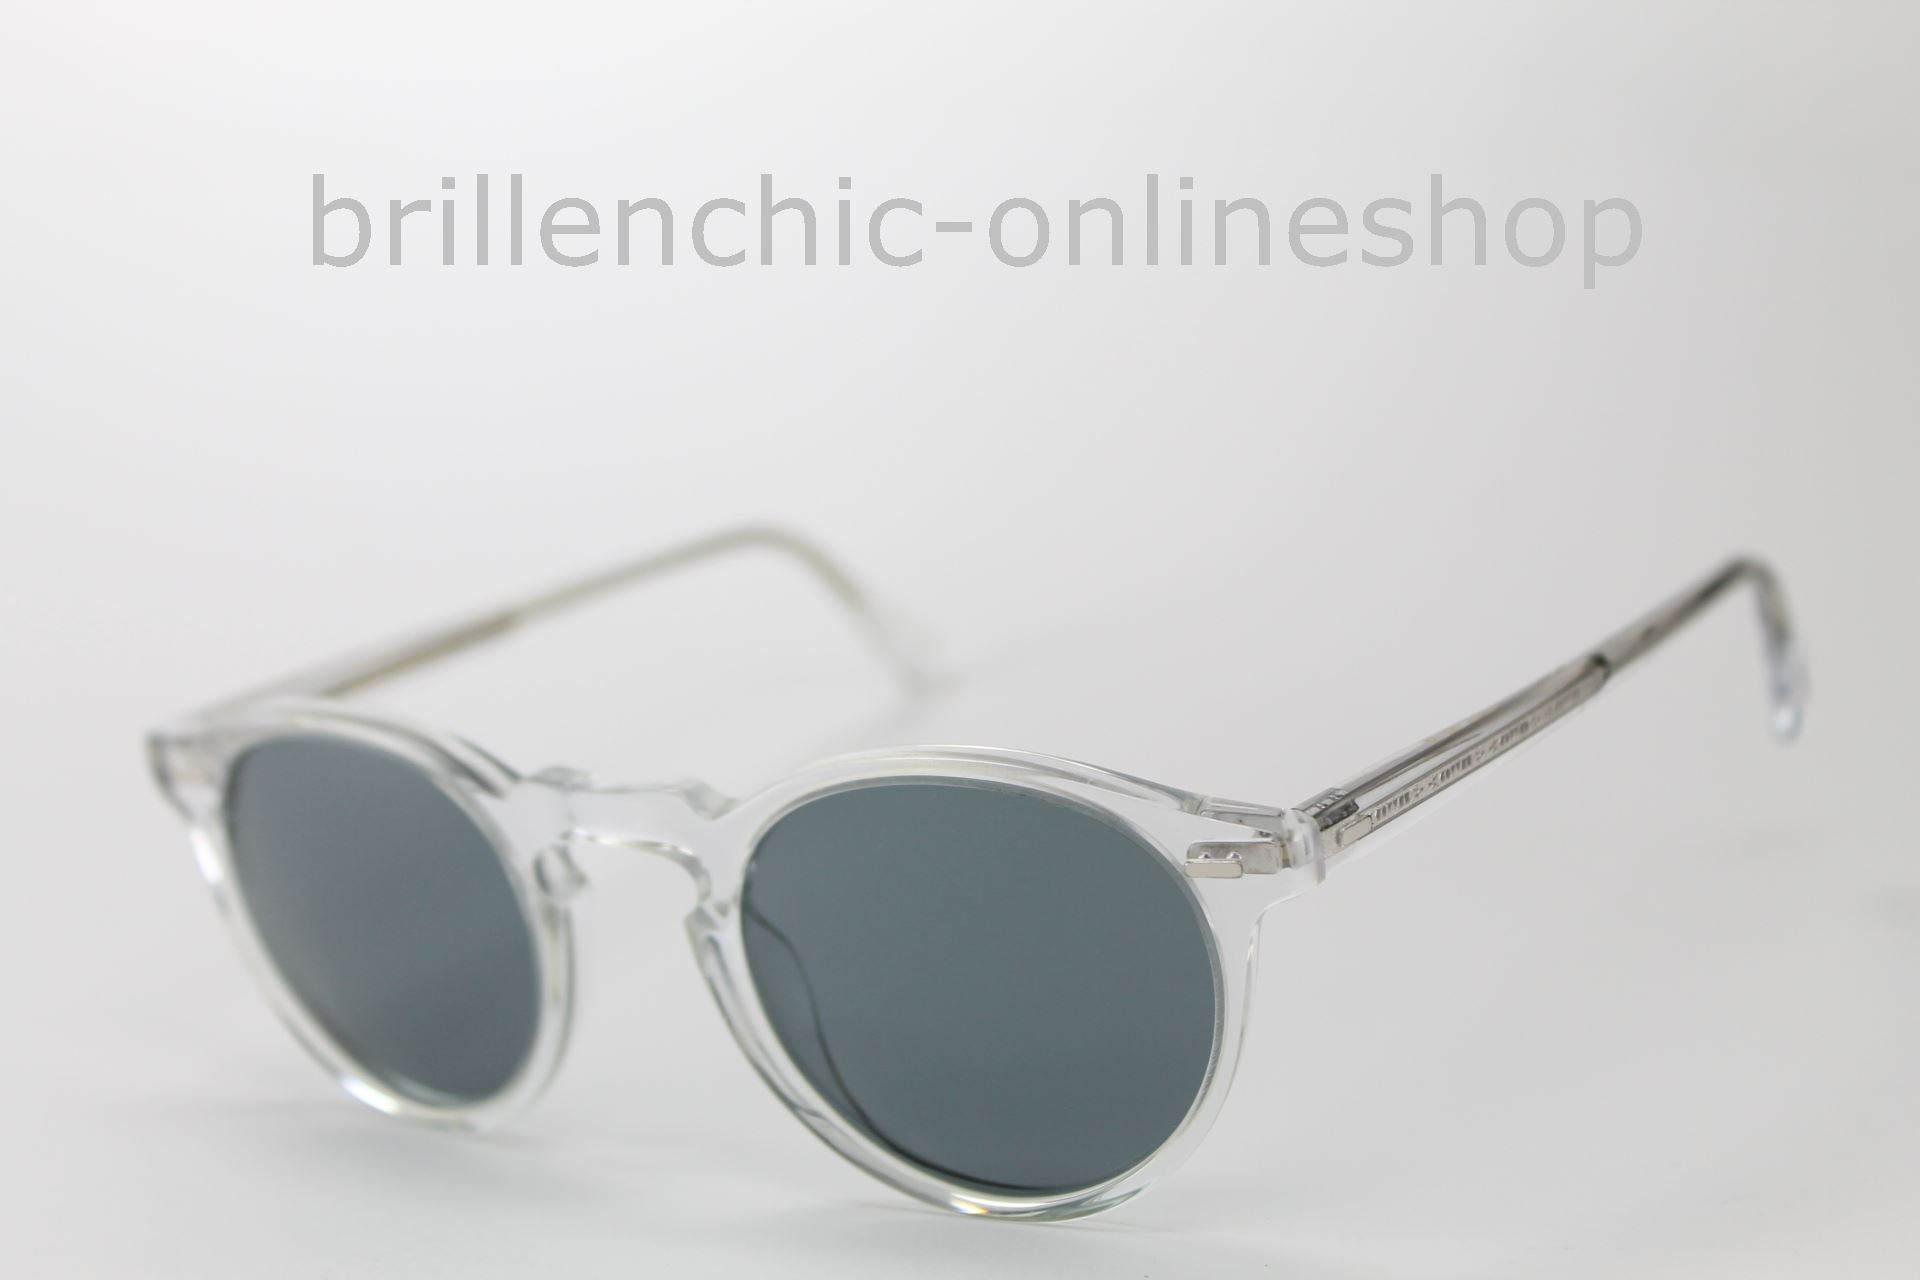 Brillenchic-onlineshop in Berlin - OLIVER PEOPLES GREGORY PECK SUN OV 5217S  5217 1101/R8 - PHOTOCROMIC 